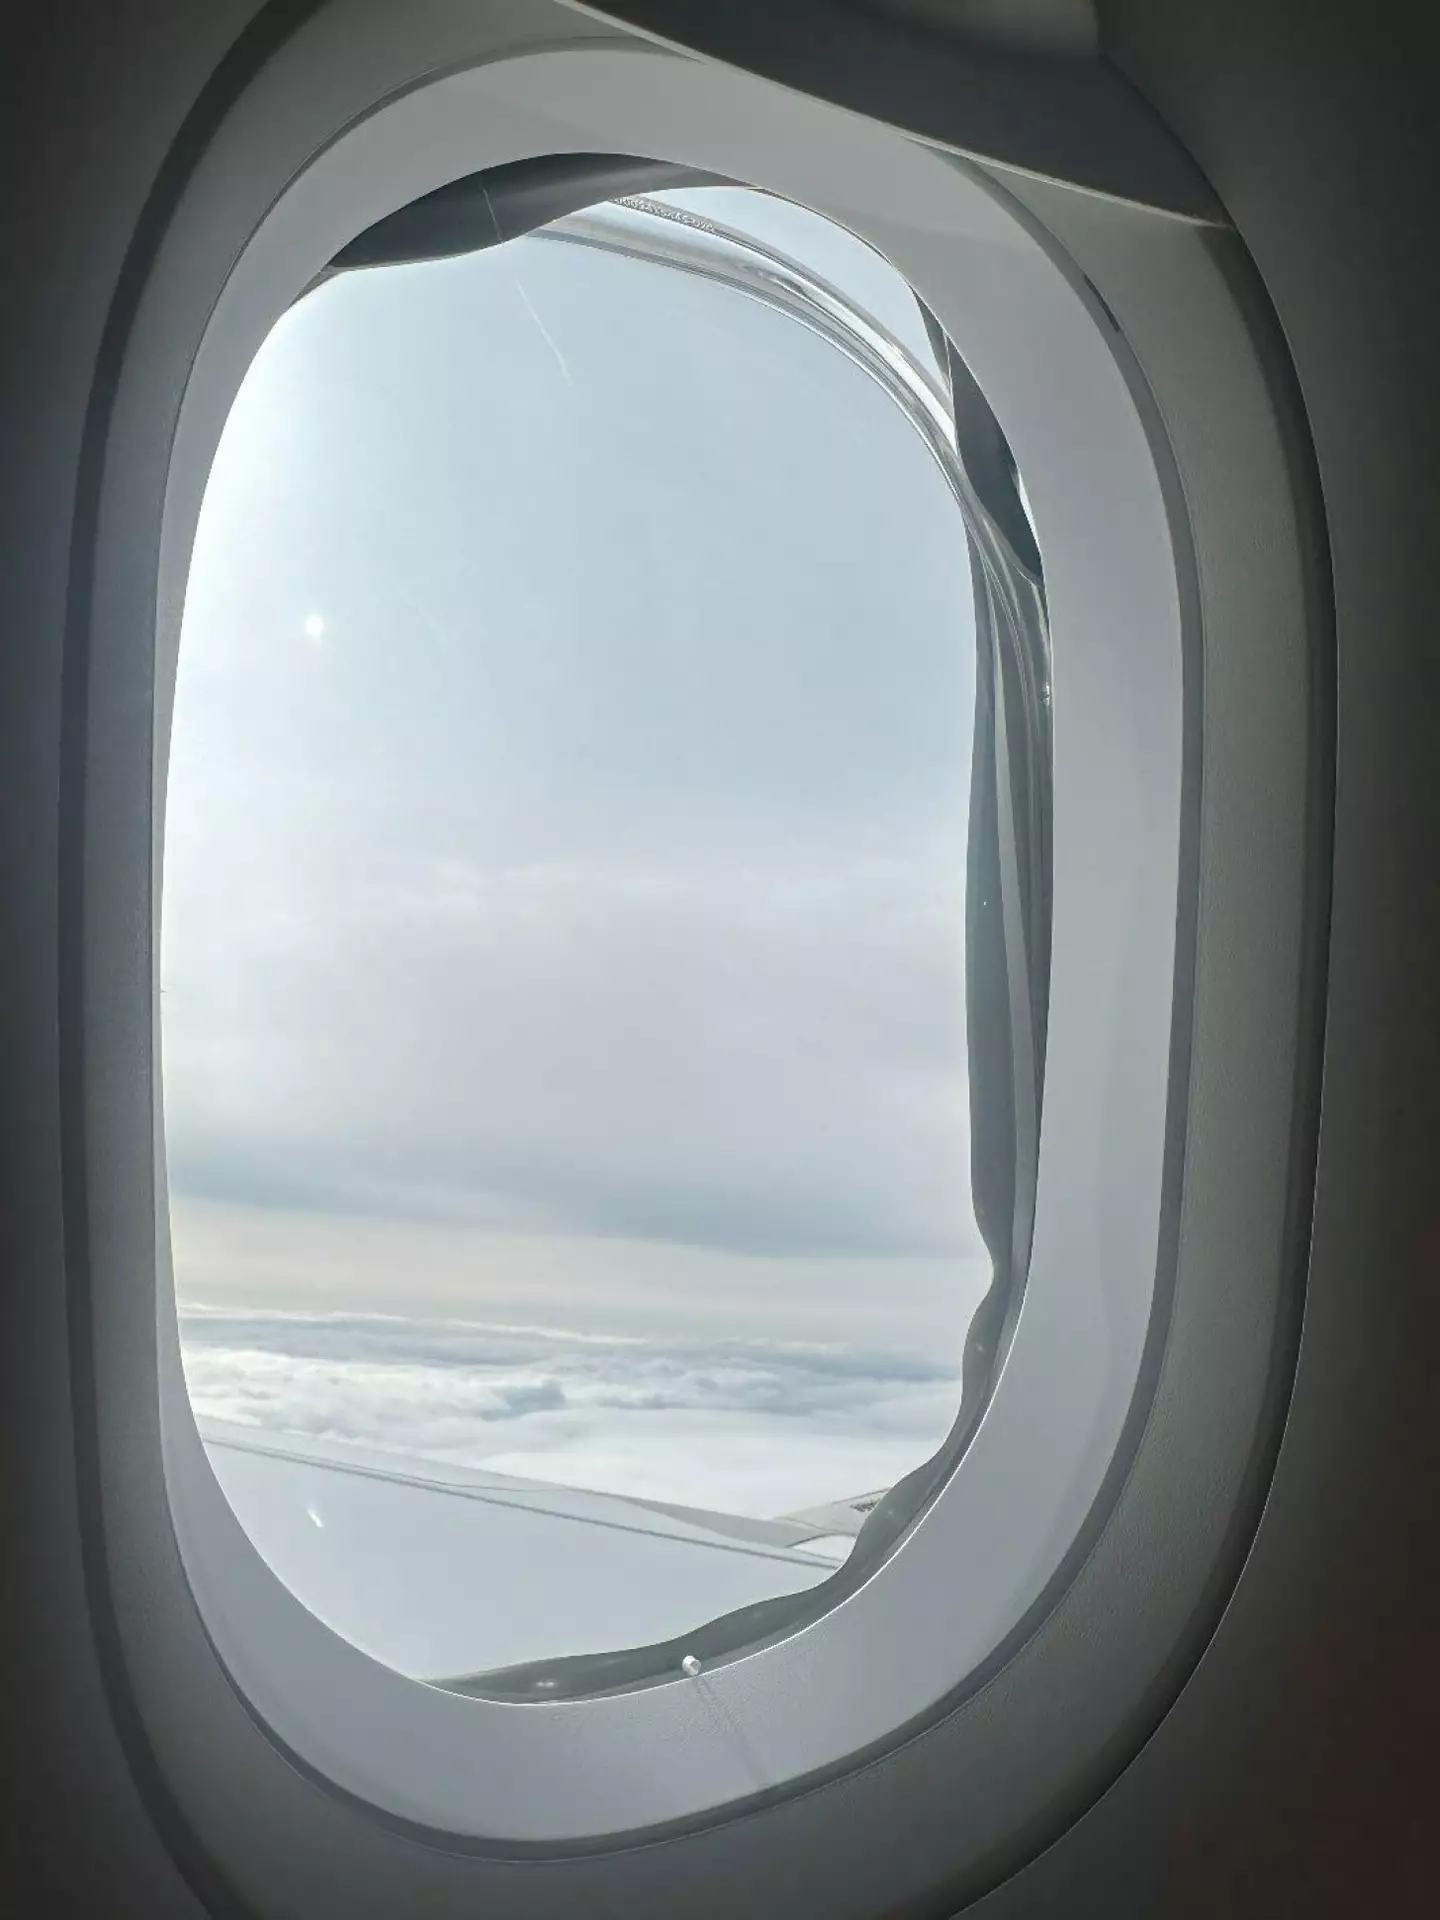 A member of the plane crew found the seal around one of the windows 'flapping' and discovered that some panes of glass were missing.